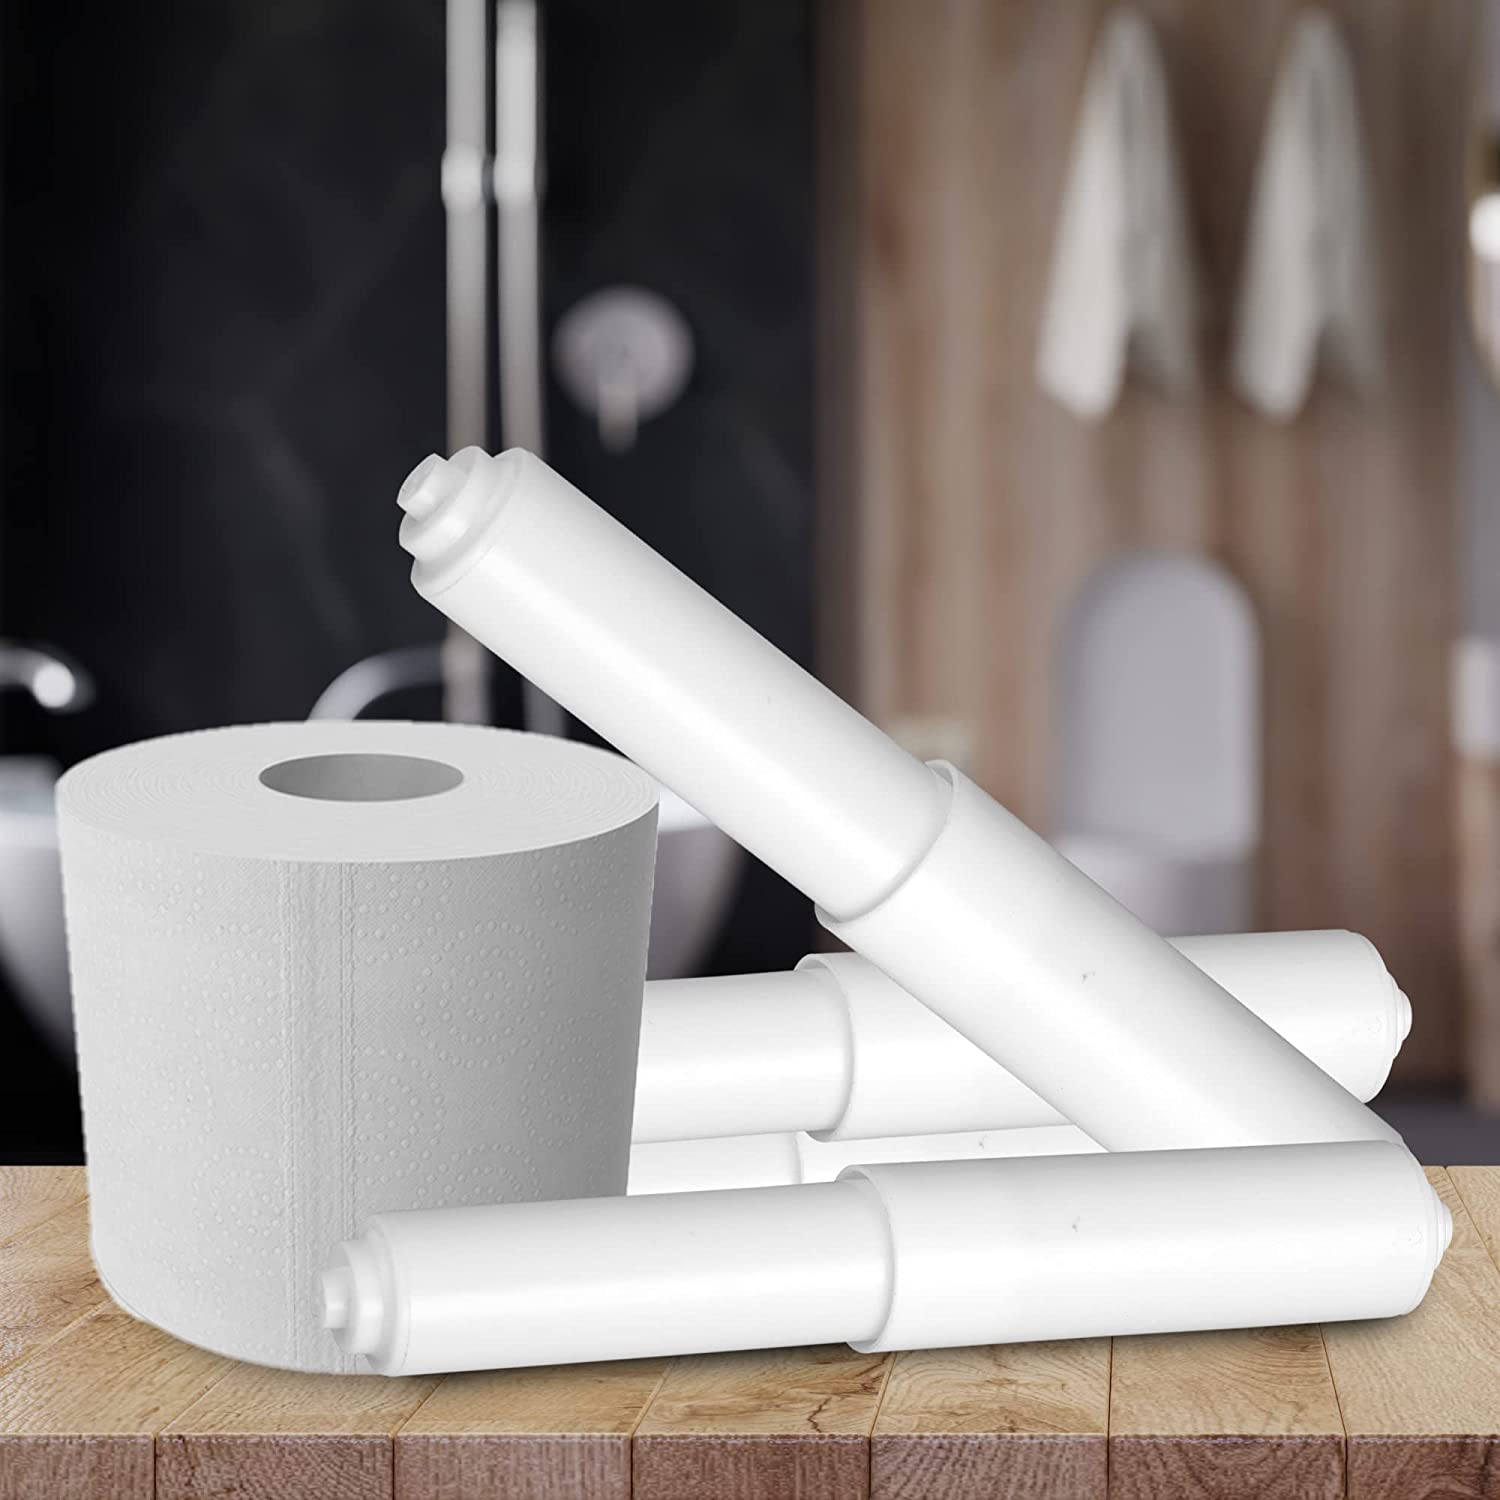 2pcs Spring Loaded Toilet Paper Holder - Durable Plastic Design, White  Adjustable Rod Replacement